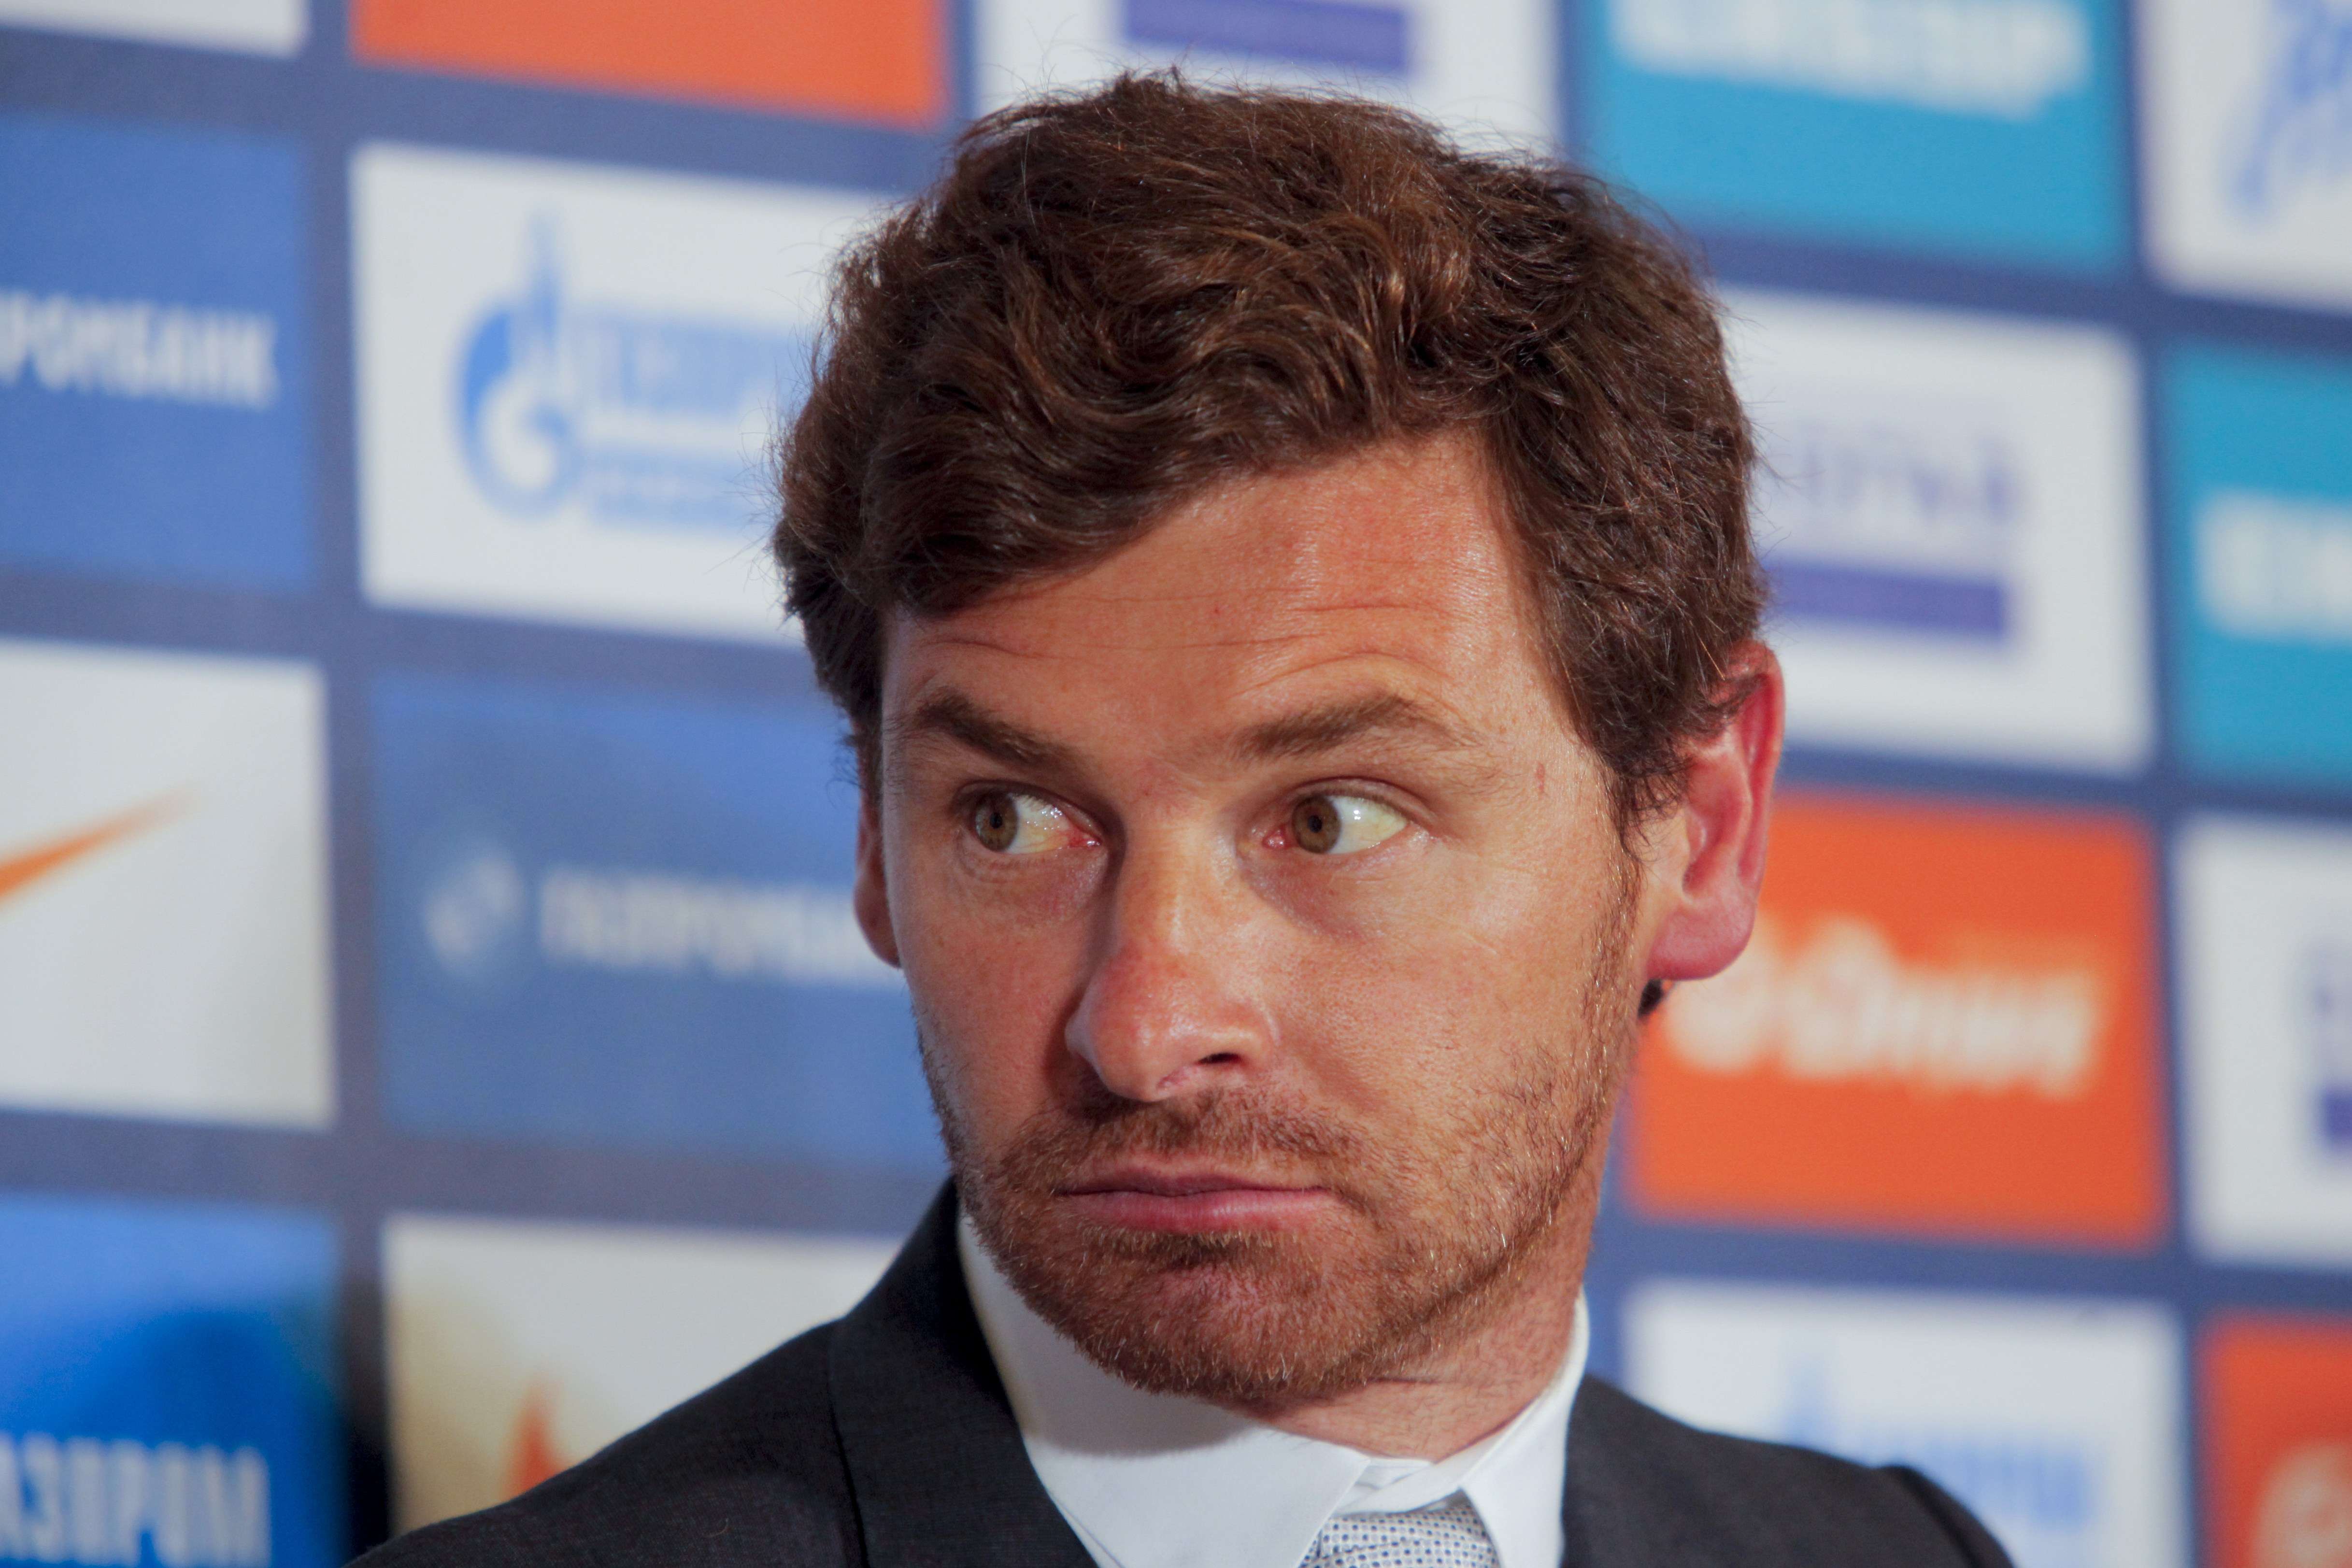 Andre Villas-Boas takes over as the new manager of Shanghai SIPG after Eriksson’s sacking. Photo: AP